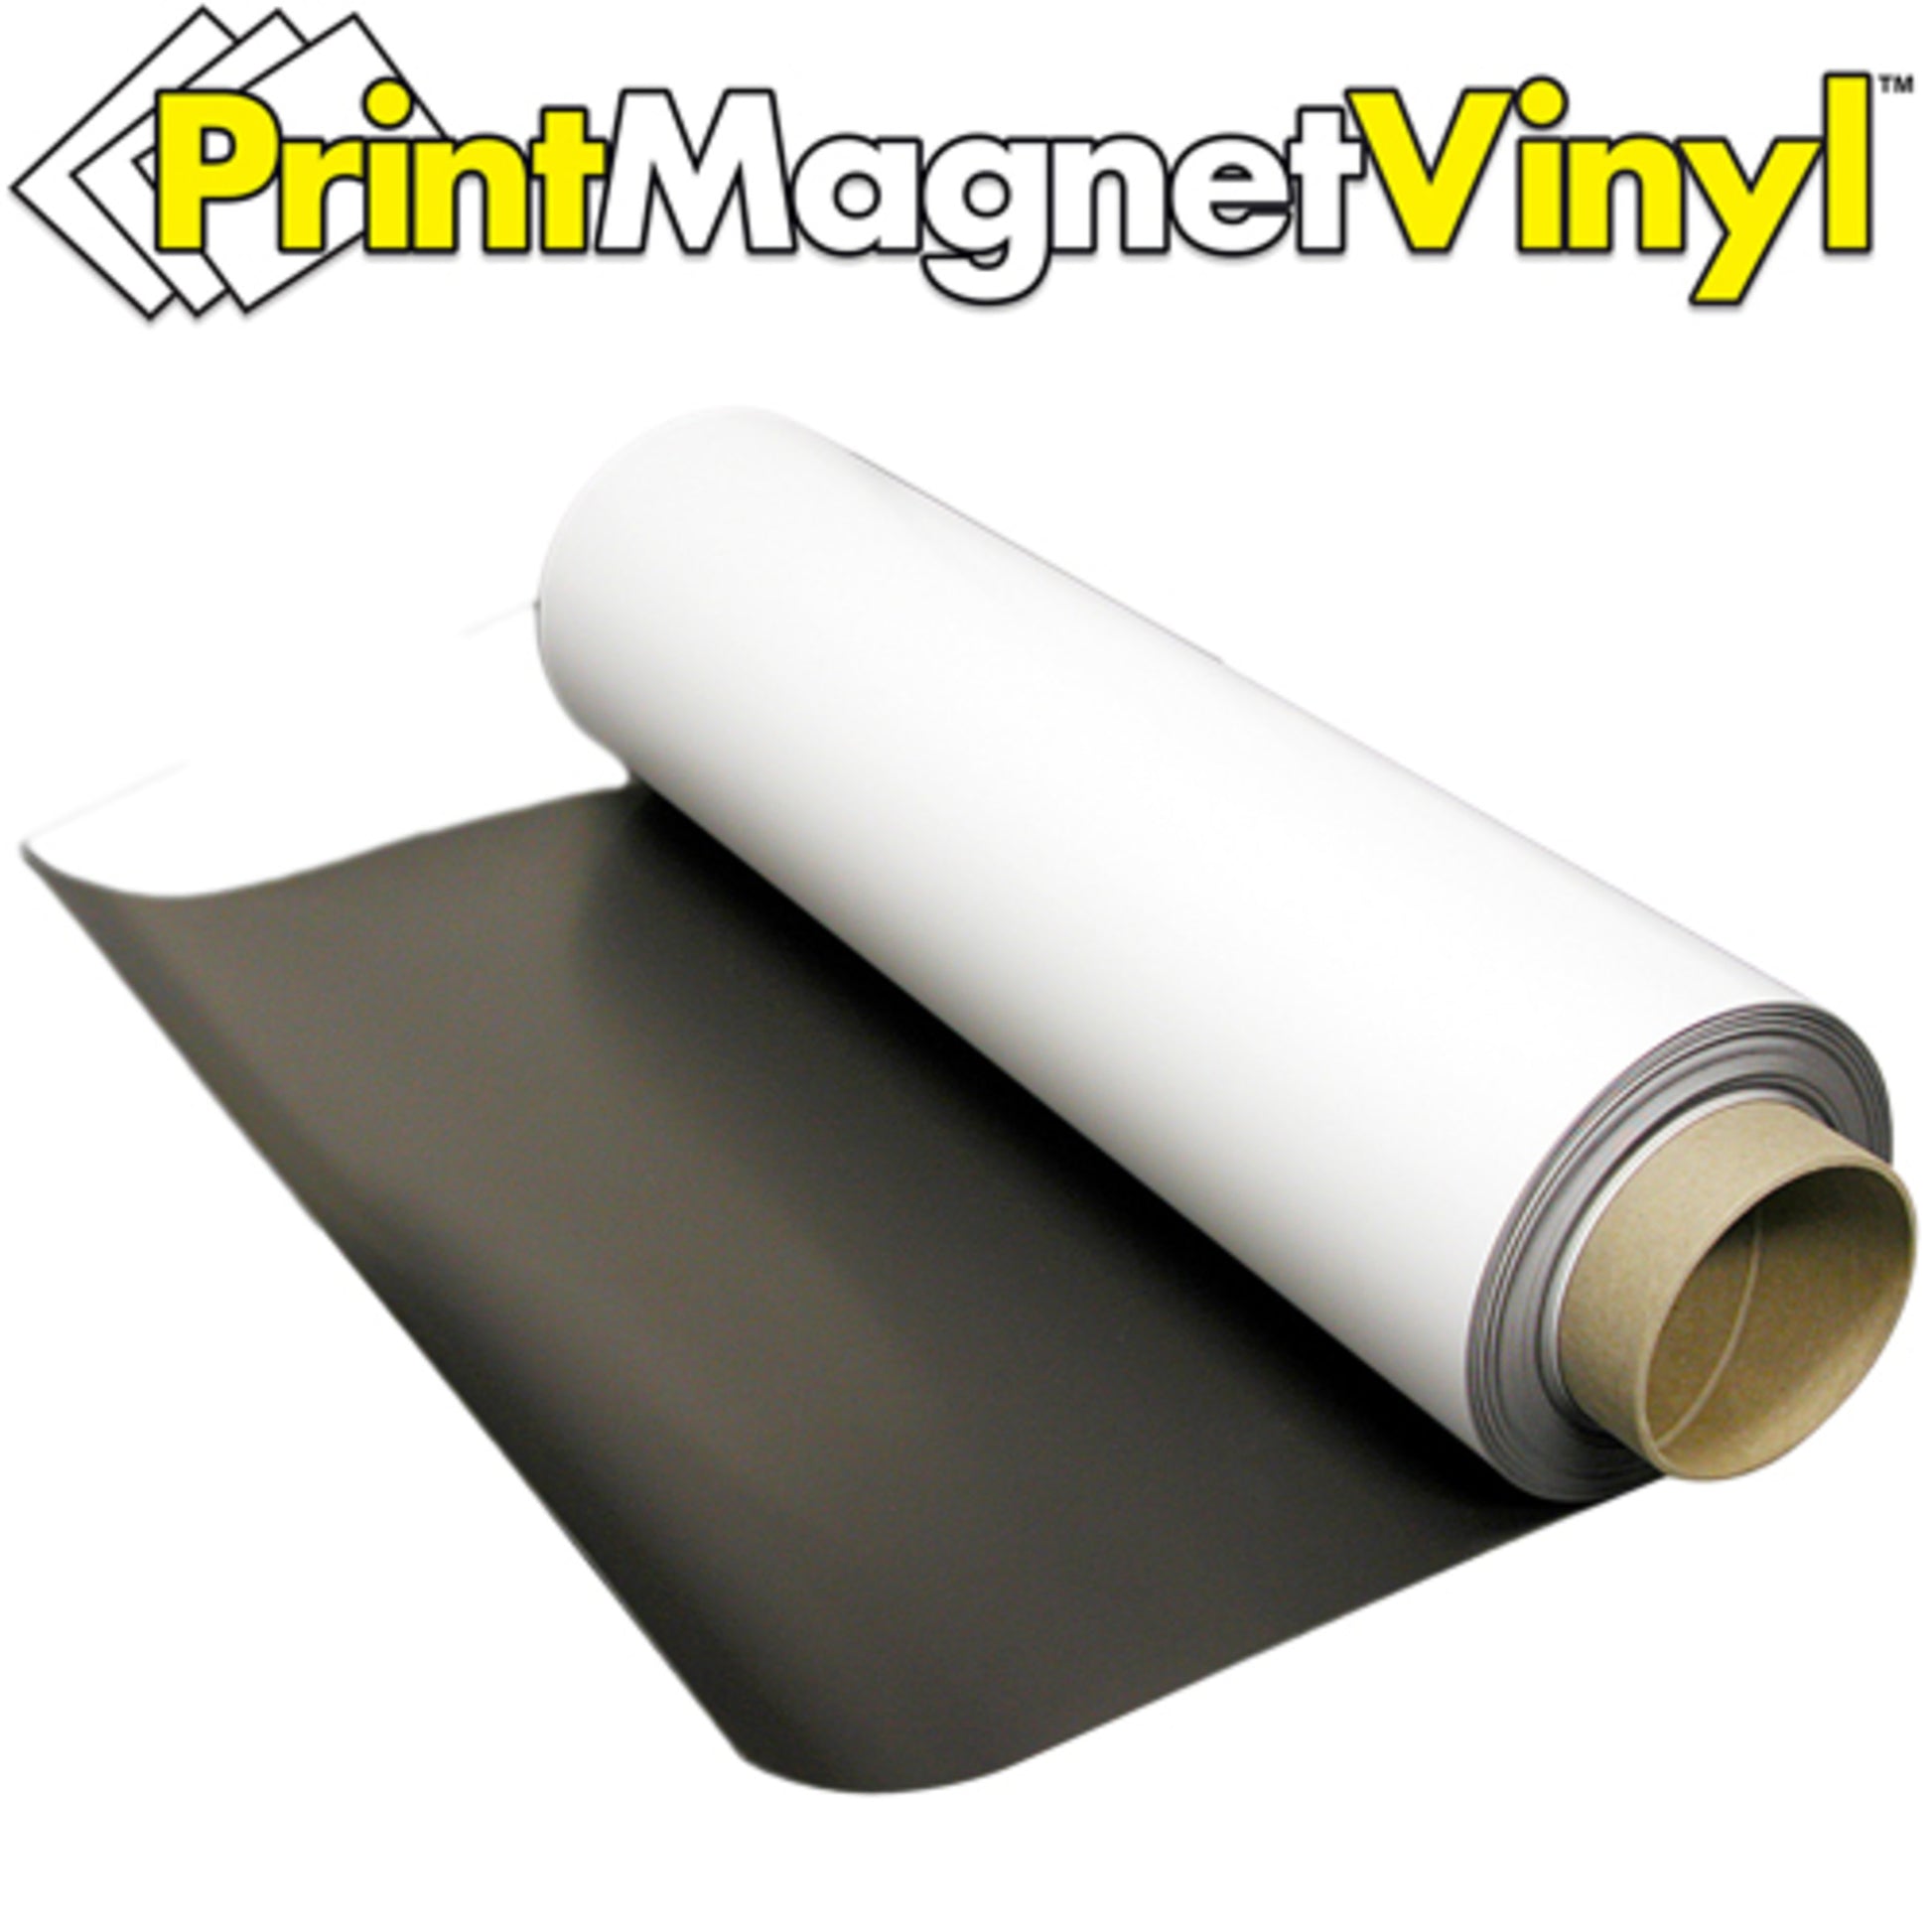 Load image into Gallery viewer, ZG6024GW25 PrintMagnetVinyl™ Flexible Magnetic Sheet - In Use